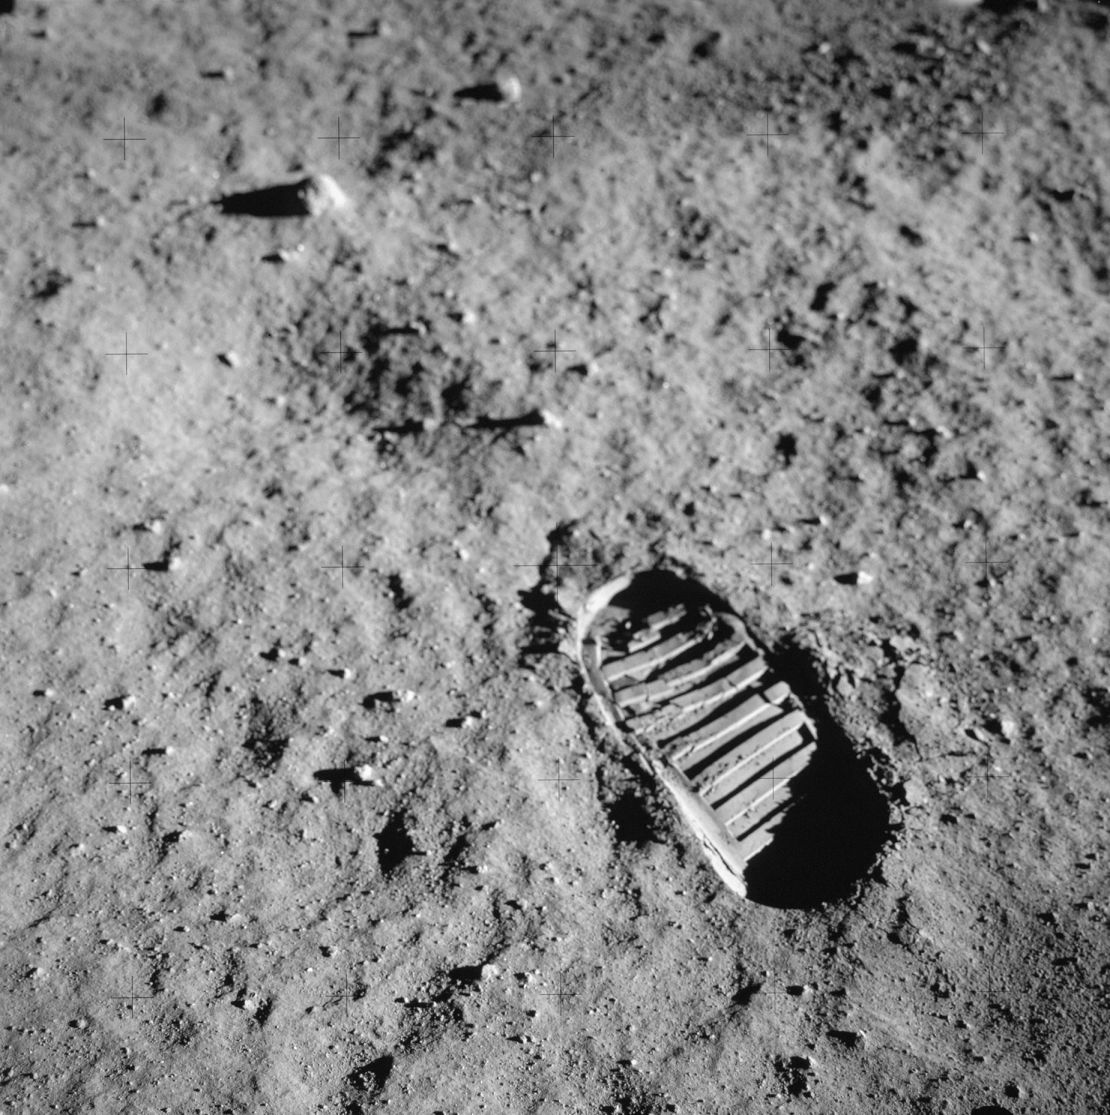 During the Apollo 11 mission, the astronauts' boots left imprints on the moon's surface.